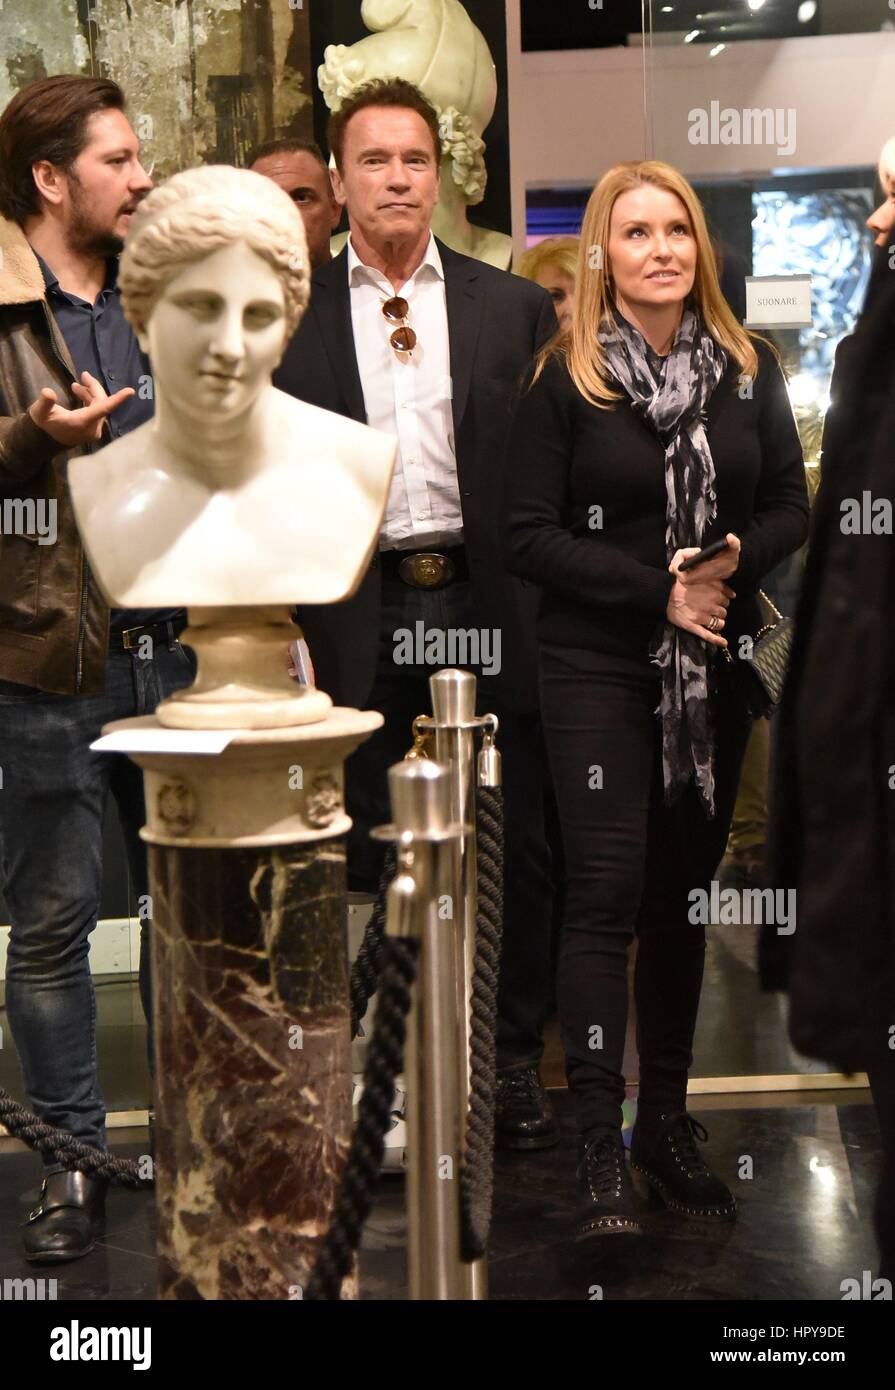 Arnold Schwarzenegger and his girlfriend Heather Milligan go shopping at various boutiques in Rome, Italy. Arnold is seen wearing a Air Shield Walker on his right leg and happily walks around the city centre.  Featuring: Arnold Schwarzenegger, Heather Milligan Where: Rome, Italy When: 25 Jan 2017 Credit: IPA/WENN.com  **Only available for publication in UK, USA, Germany, Austria, Switzerland** Stock Photo